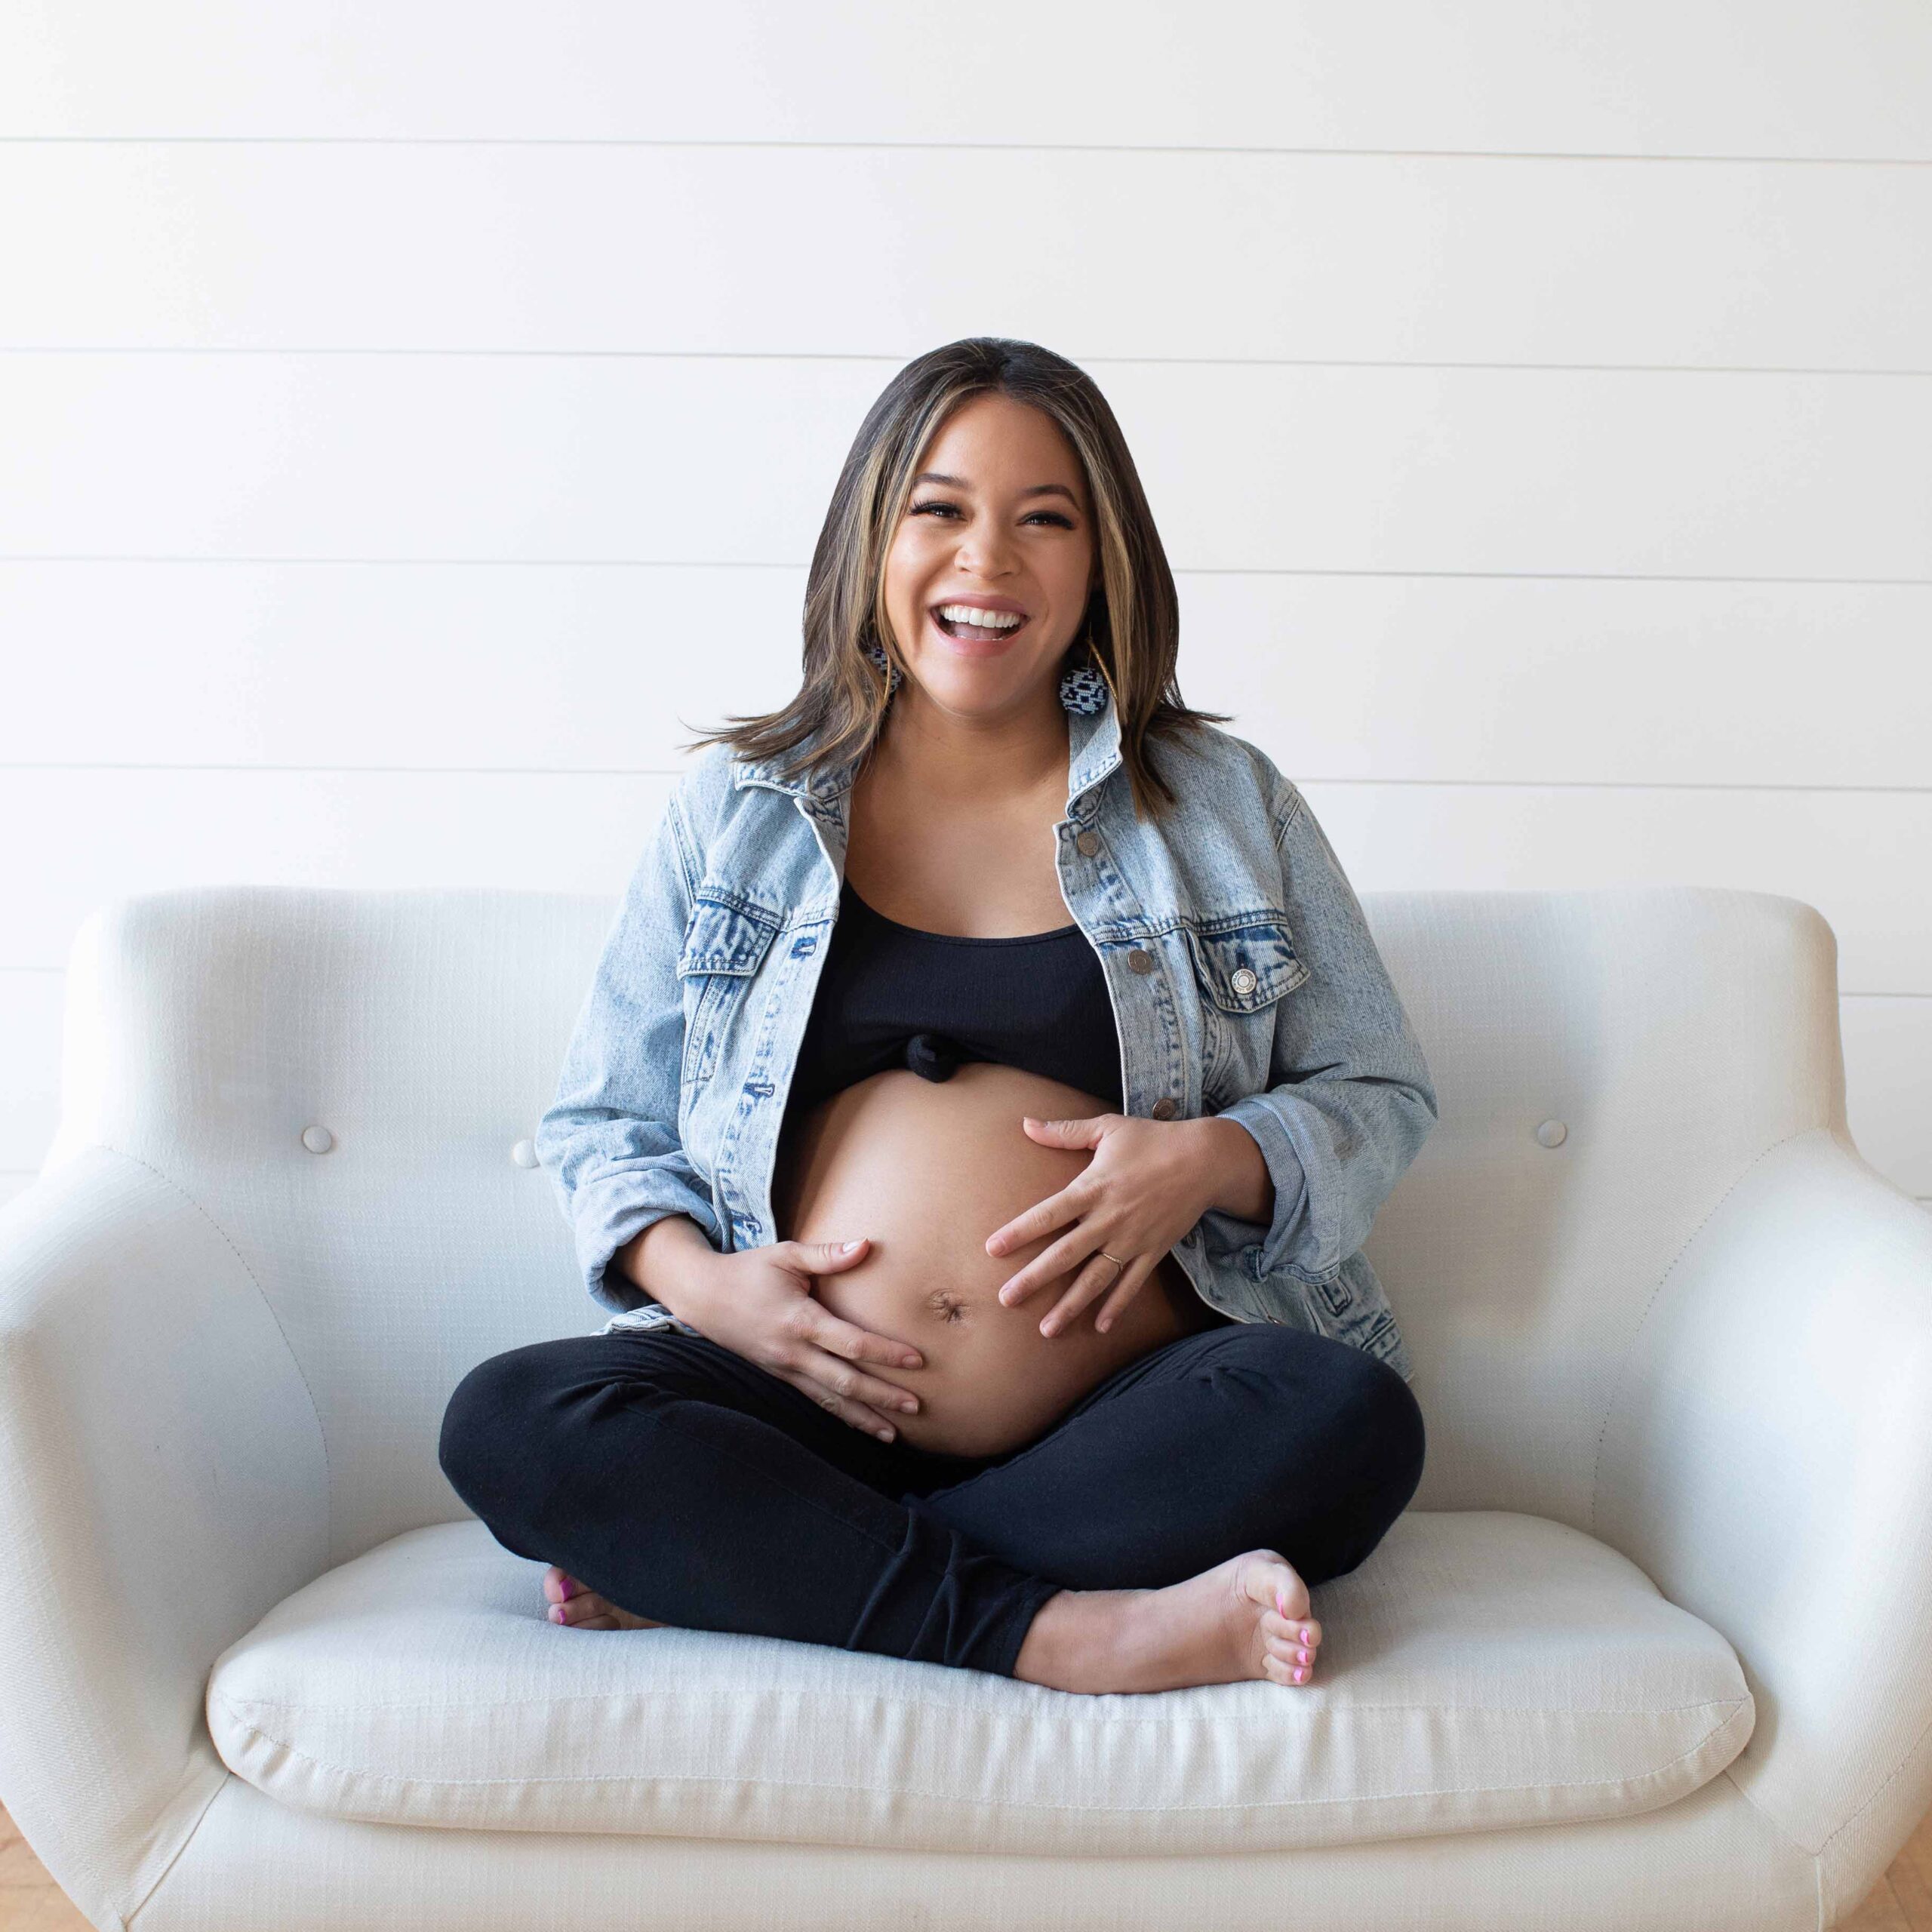 Pregnant woman holding belly, laughing